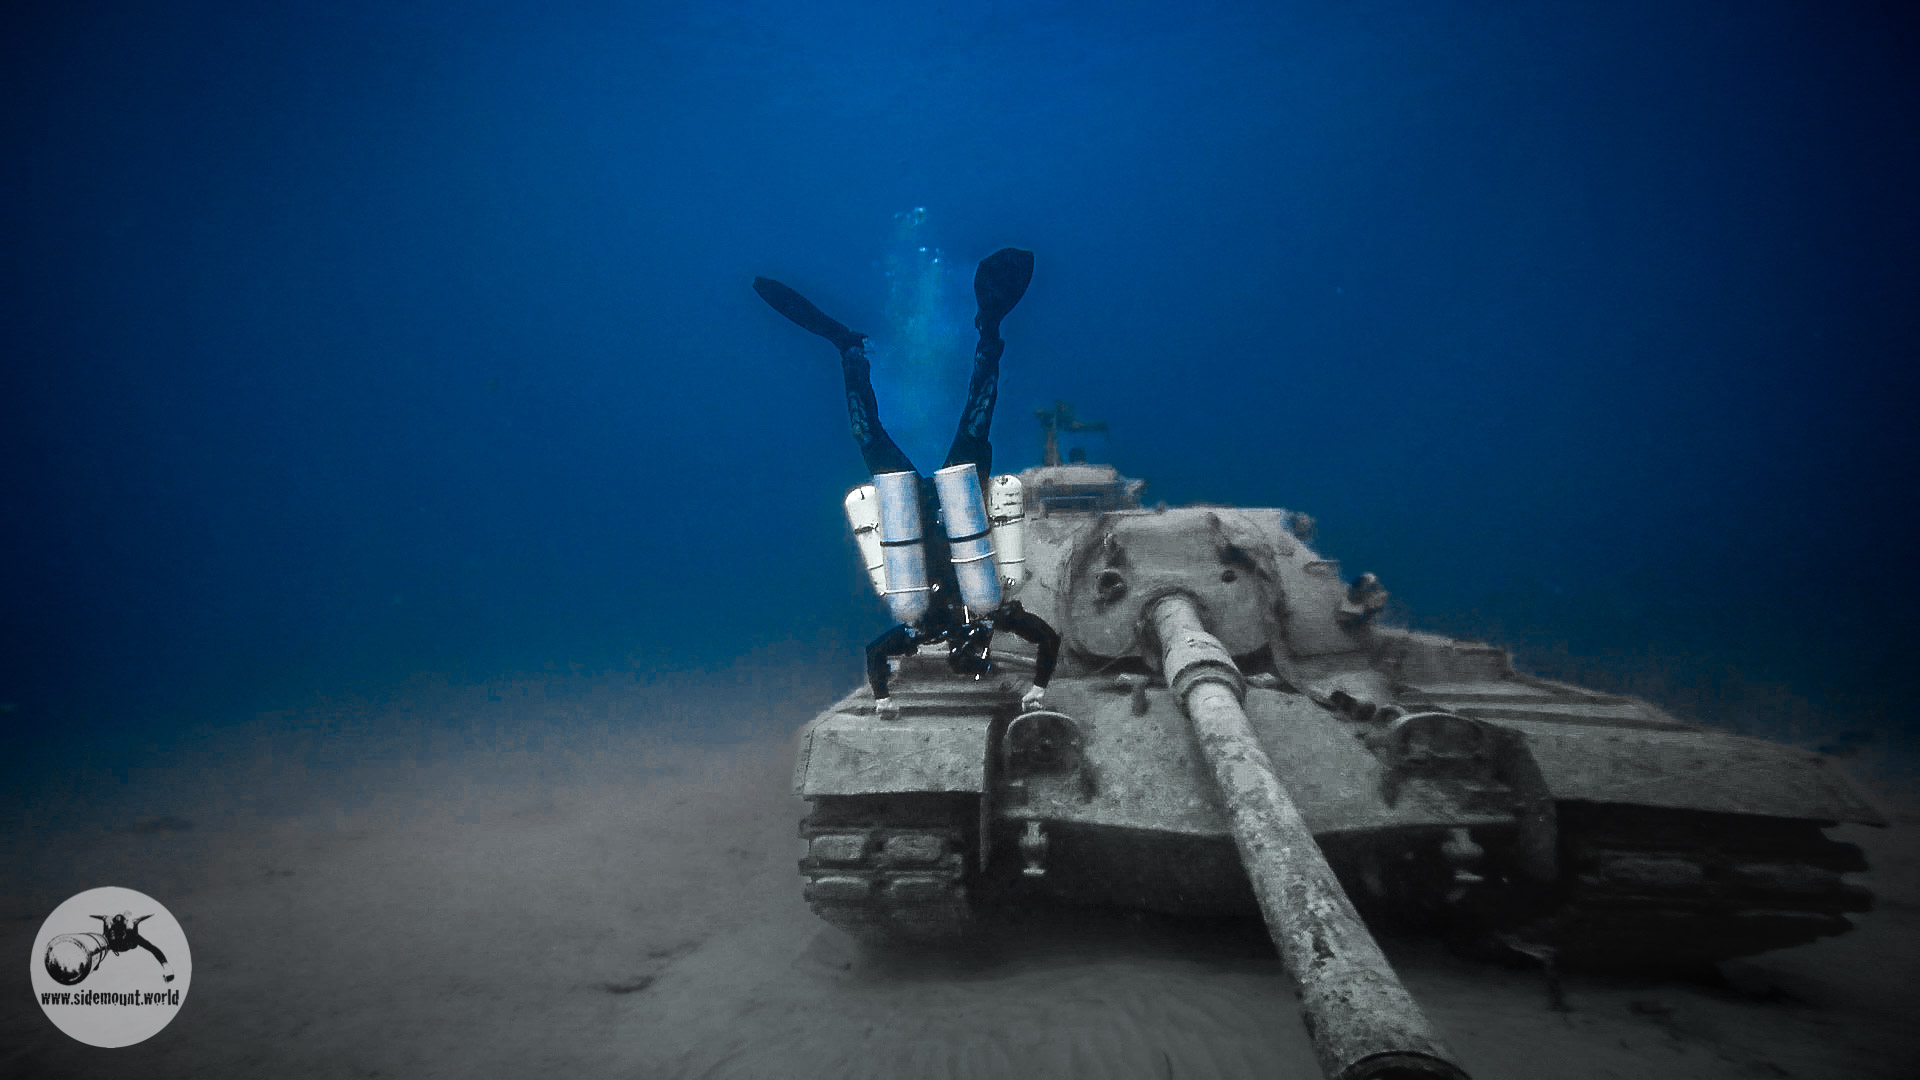 Technical Diver head down above tank